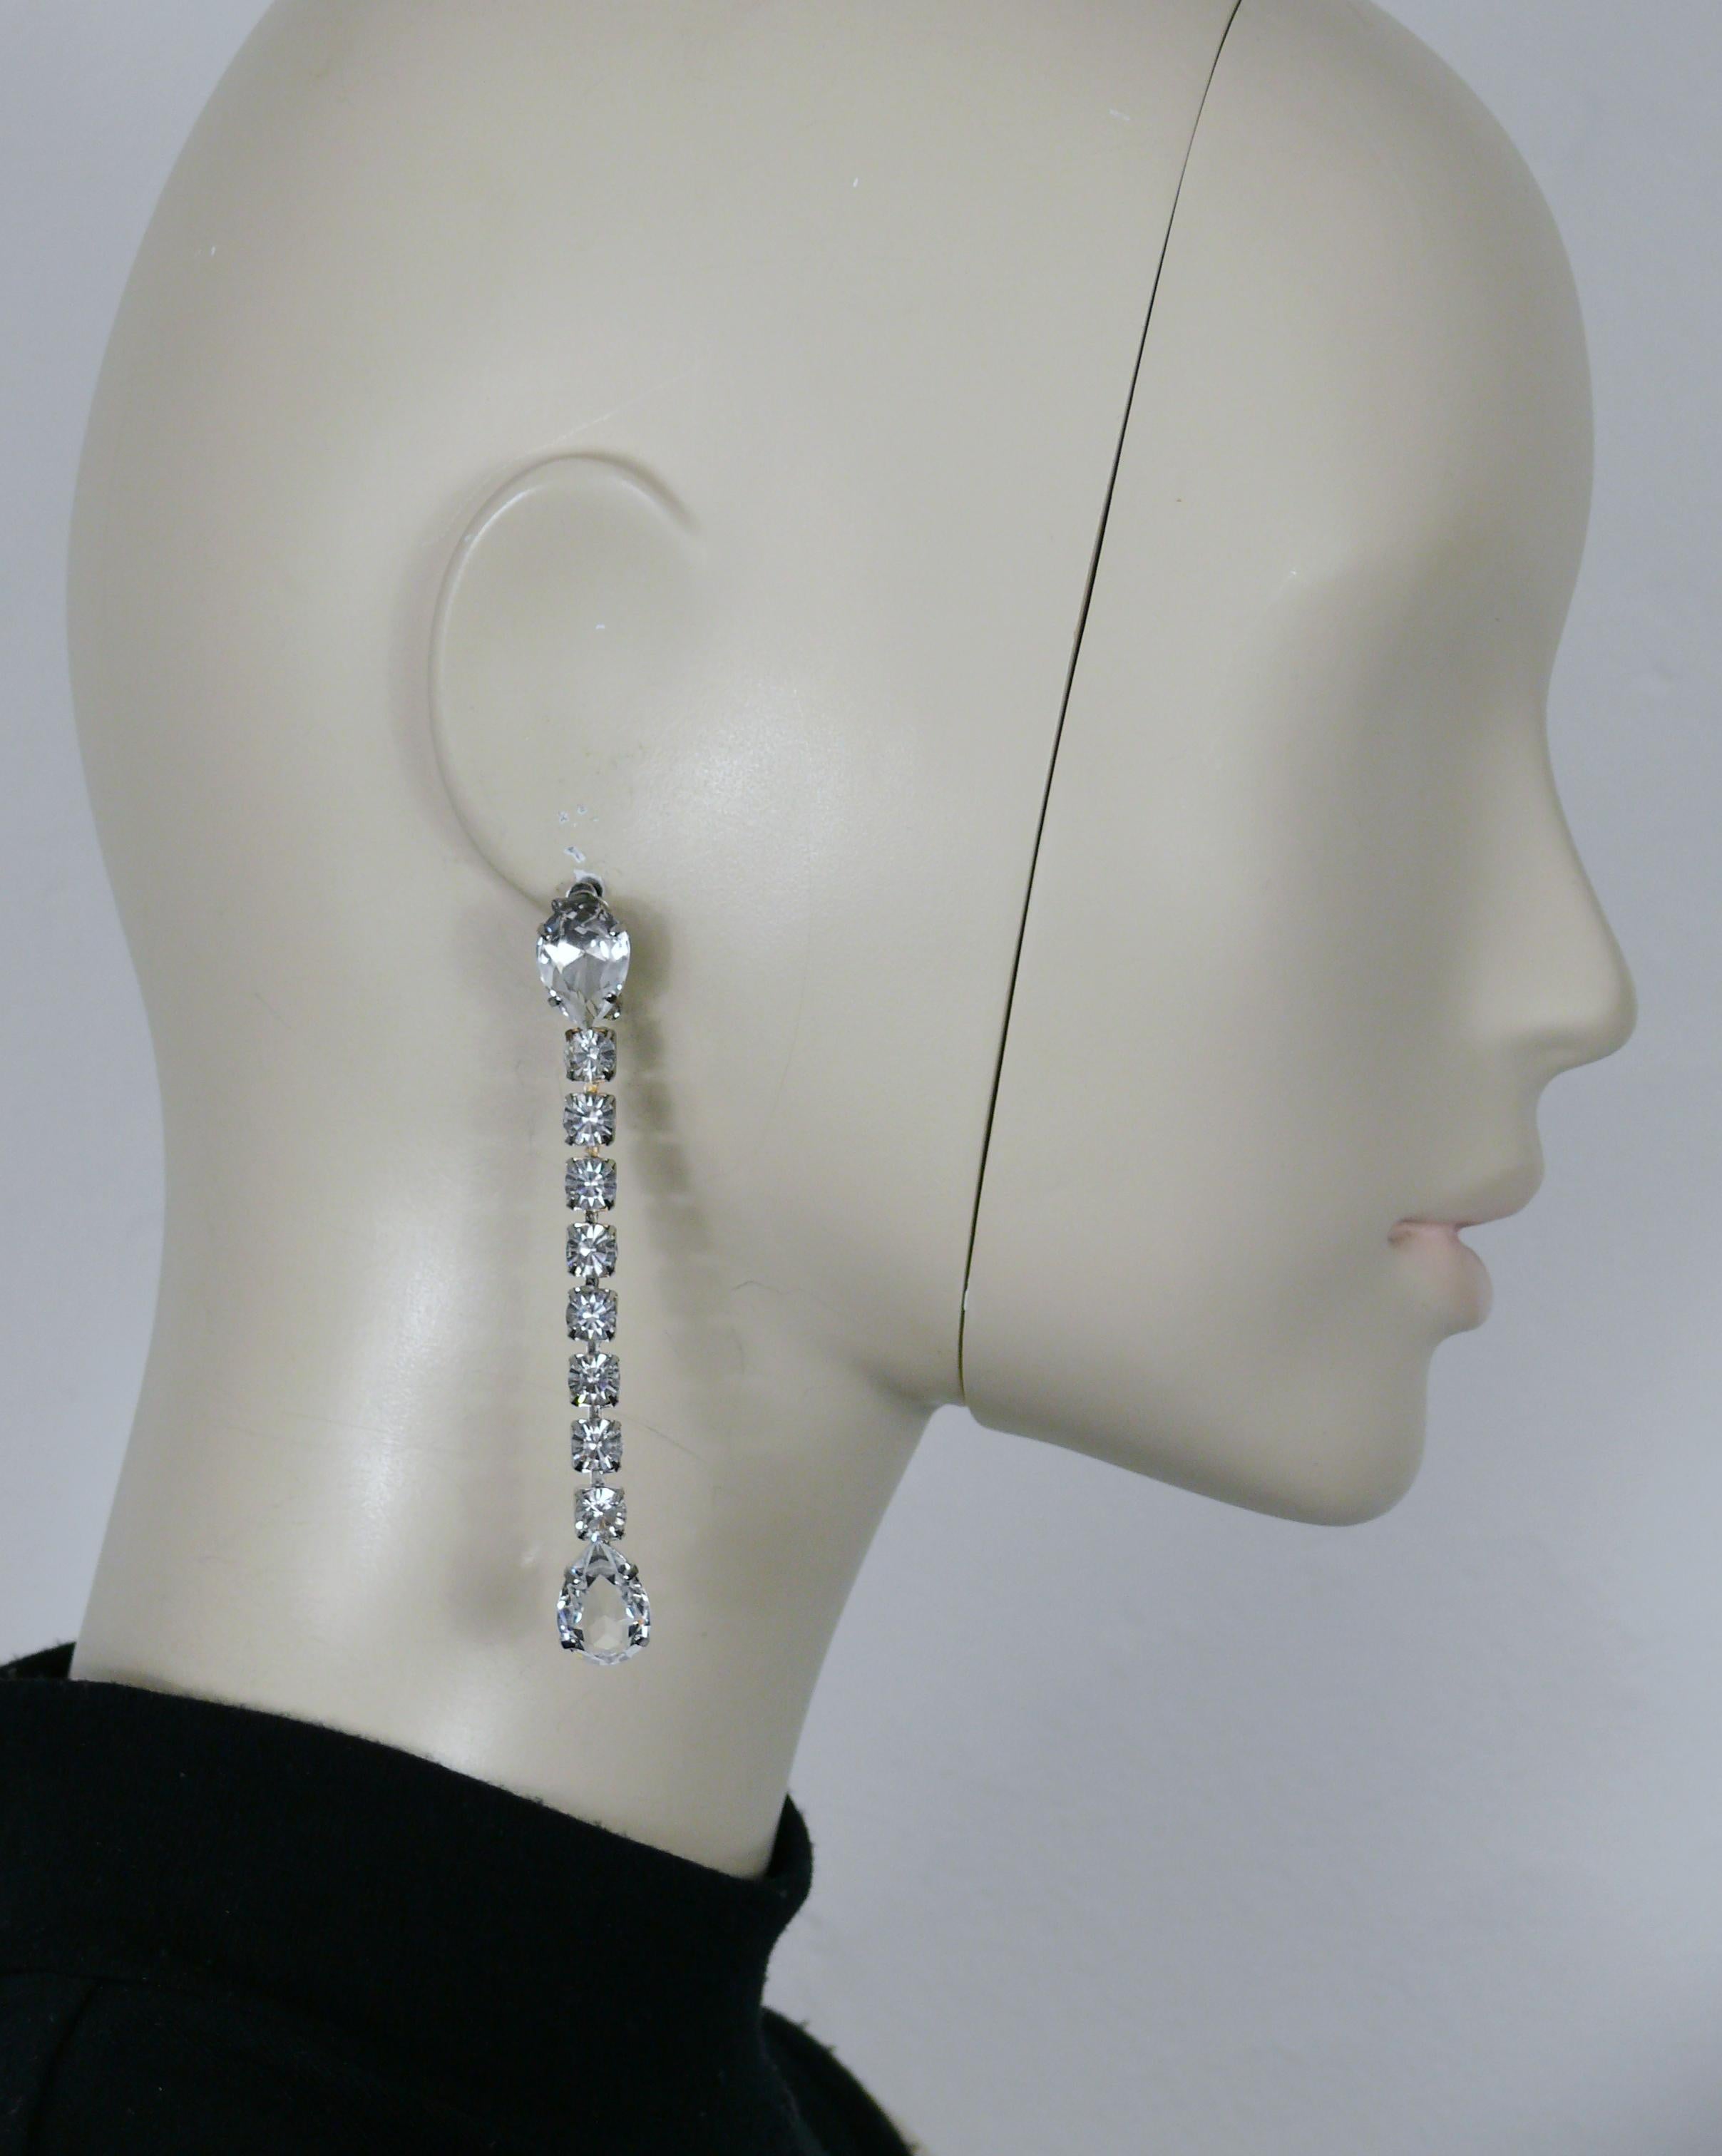 THIERRY MUGLER vintage silver tone and clear crystal dangling earrings.

Embossed TM.

Indicative measurements : height approx. 8.7 cm (3.43 inches) / max. width approx. 1 cm (0.39 inch).

Weight per earring : approx. 10 grams.

Material : Silver